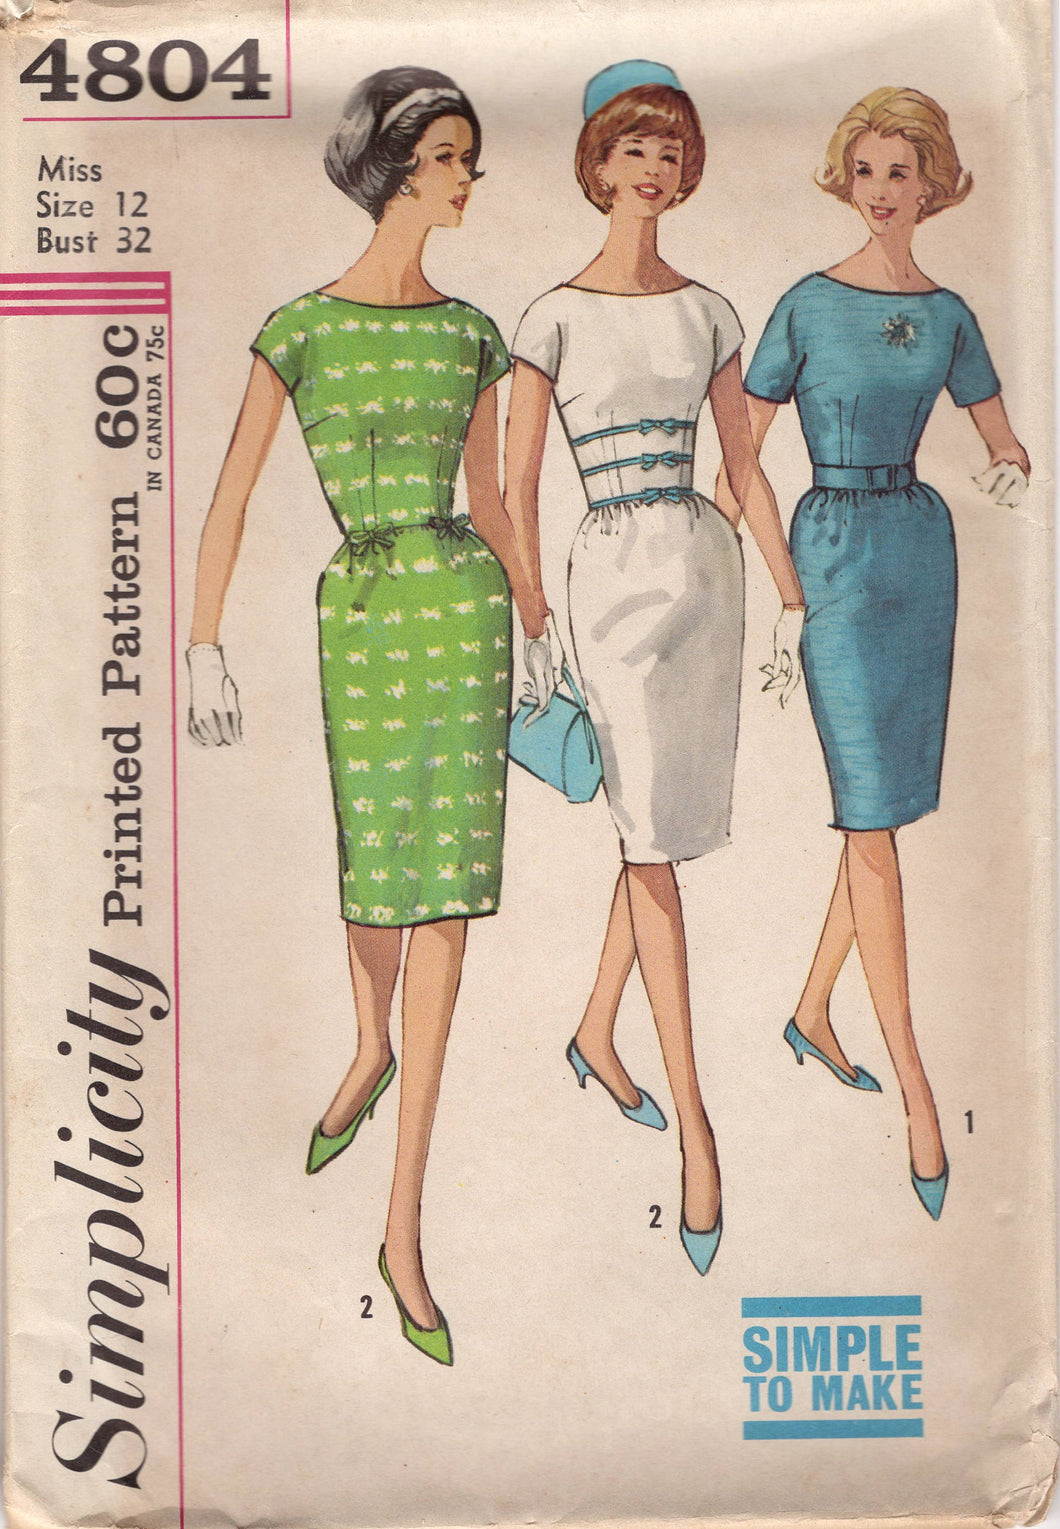 1960's Simplicity Sheath Dress Pattern with Boat Neck and Fitted Waist - Bust 32